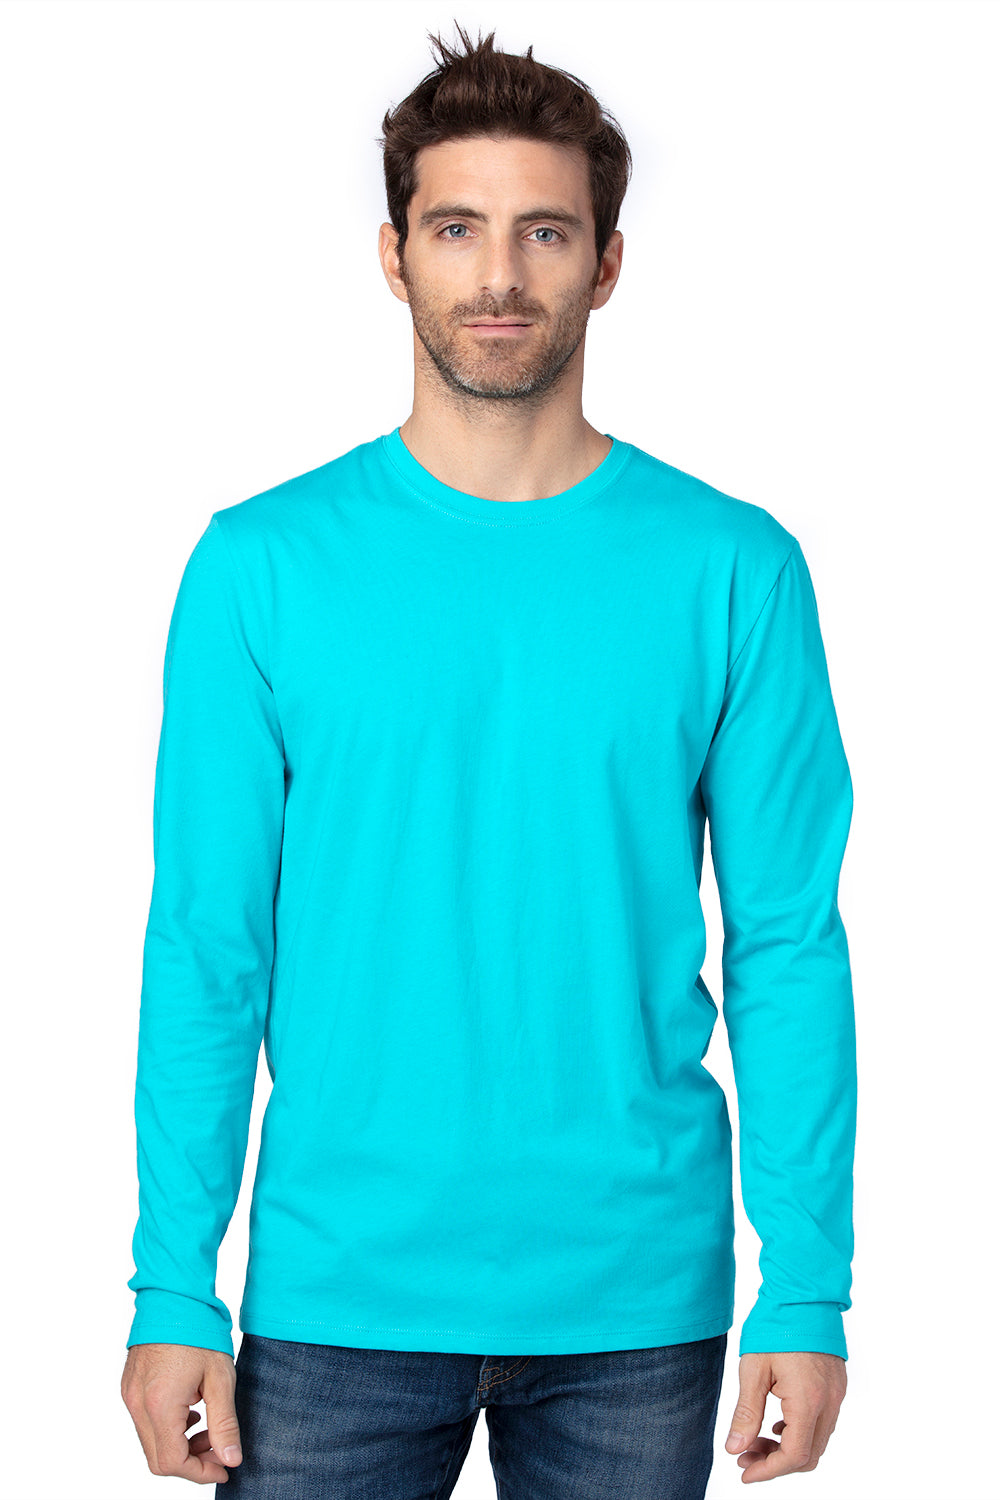 Threadfast Apparel 100LS Mens Ultimate Long Sleeve Crewneck T-Shirt Pacific Blue Front